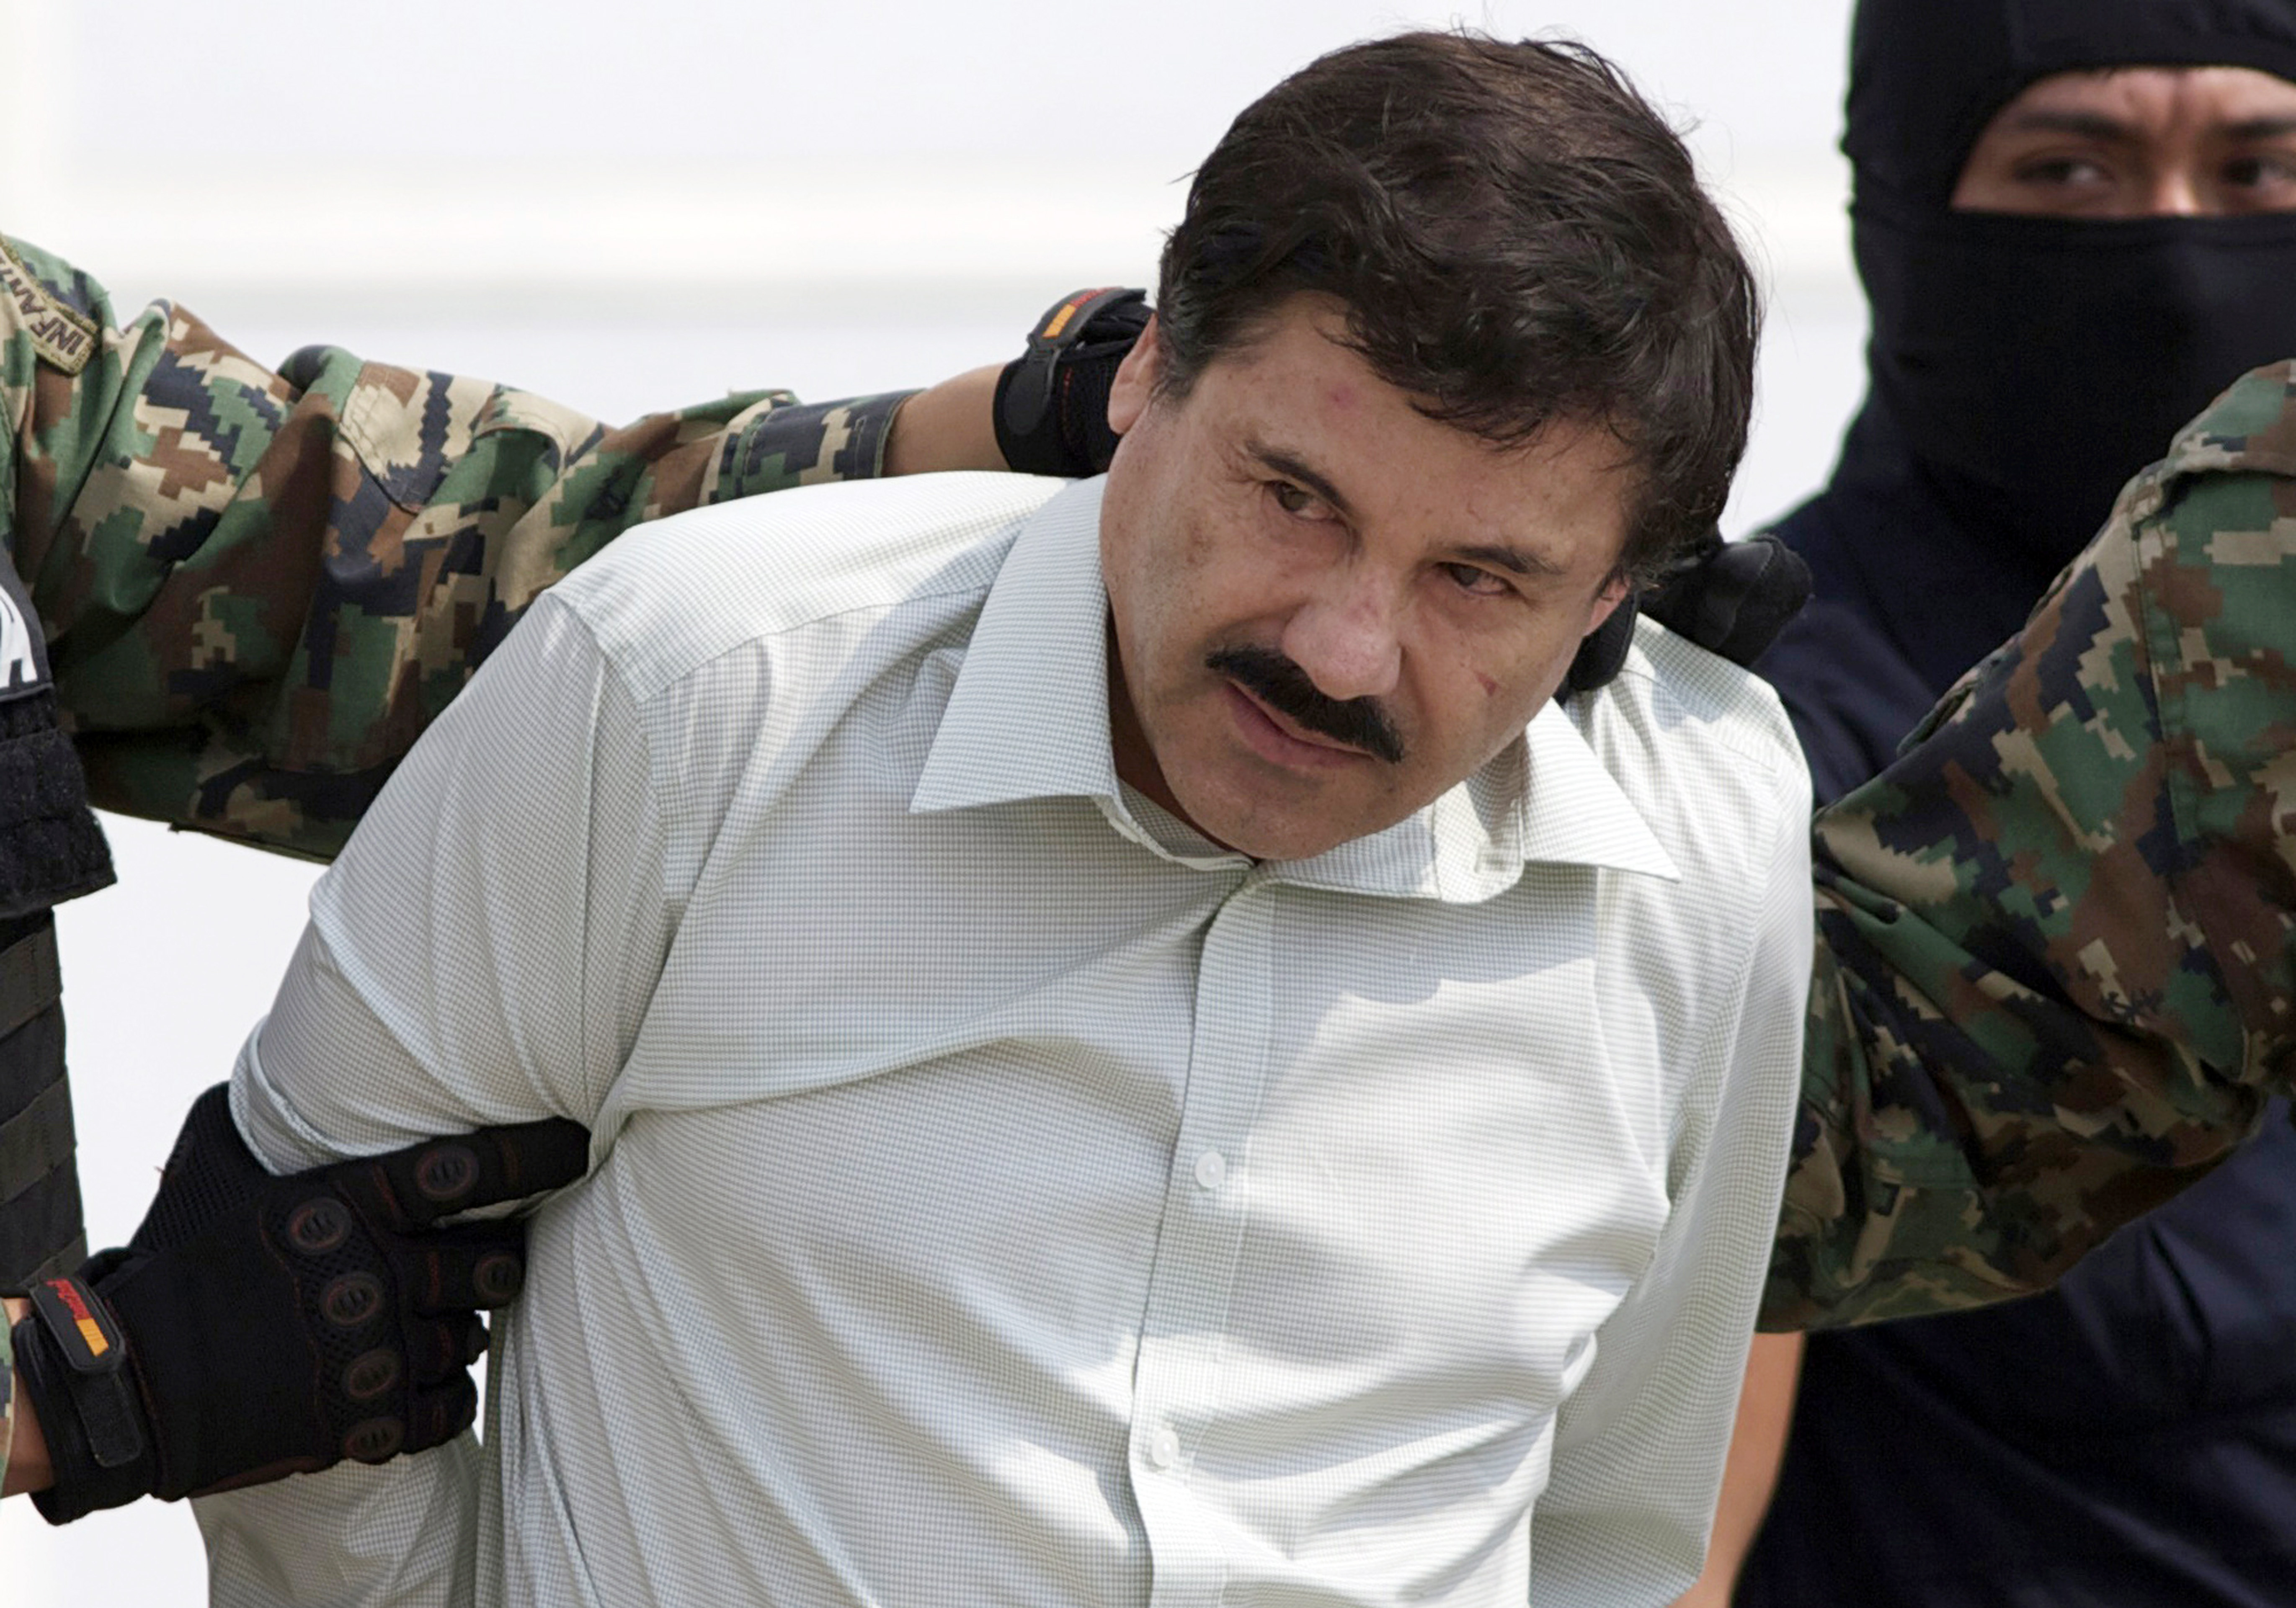 FILE - In this Feb. 22, 2014 file photo, Joaquin "El Chapo" Guzmán, head of the Sinaloa Cartel in Mexico, is escorted to a helicopter in Mexico City after his capture.  Mexican President Andrés Manuel López Obrador said on Wednesday, January 18, 2023, that the government will analyze the request for "El Chapo" to be returned to Mexico due to the alleged inhumane conditions in which he would find himself in a US prison where he is serving a life sentence.  (AP Photo/Eduardo Verdugo, File)